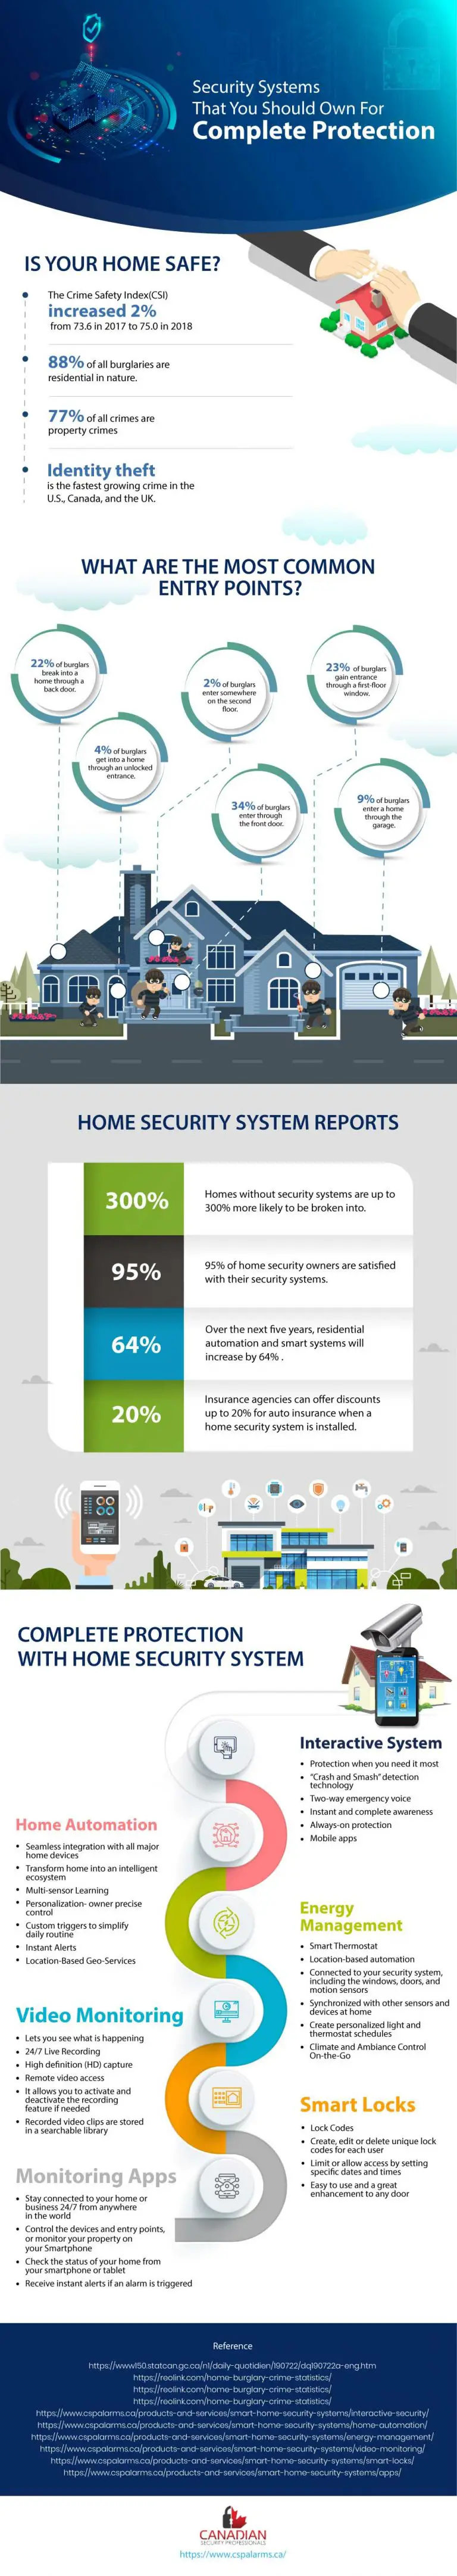 how-why-security-systems-provide-protection-for-your-home_infographic.jpg